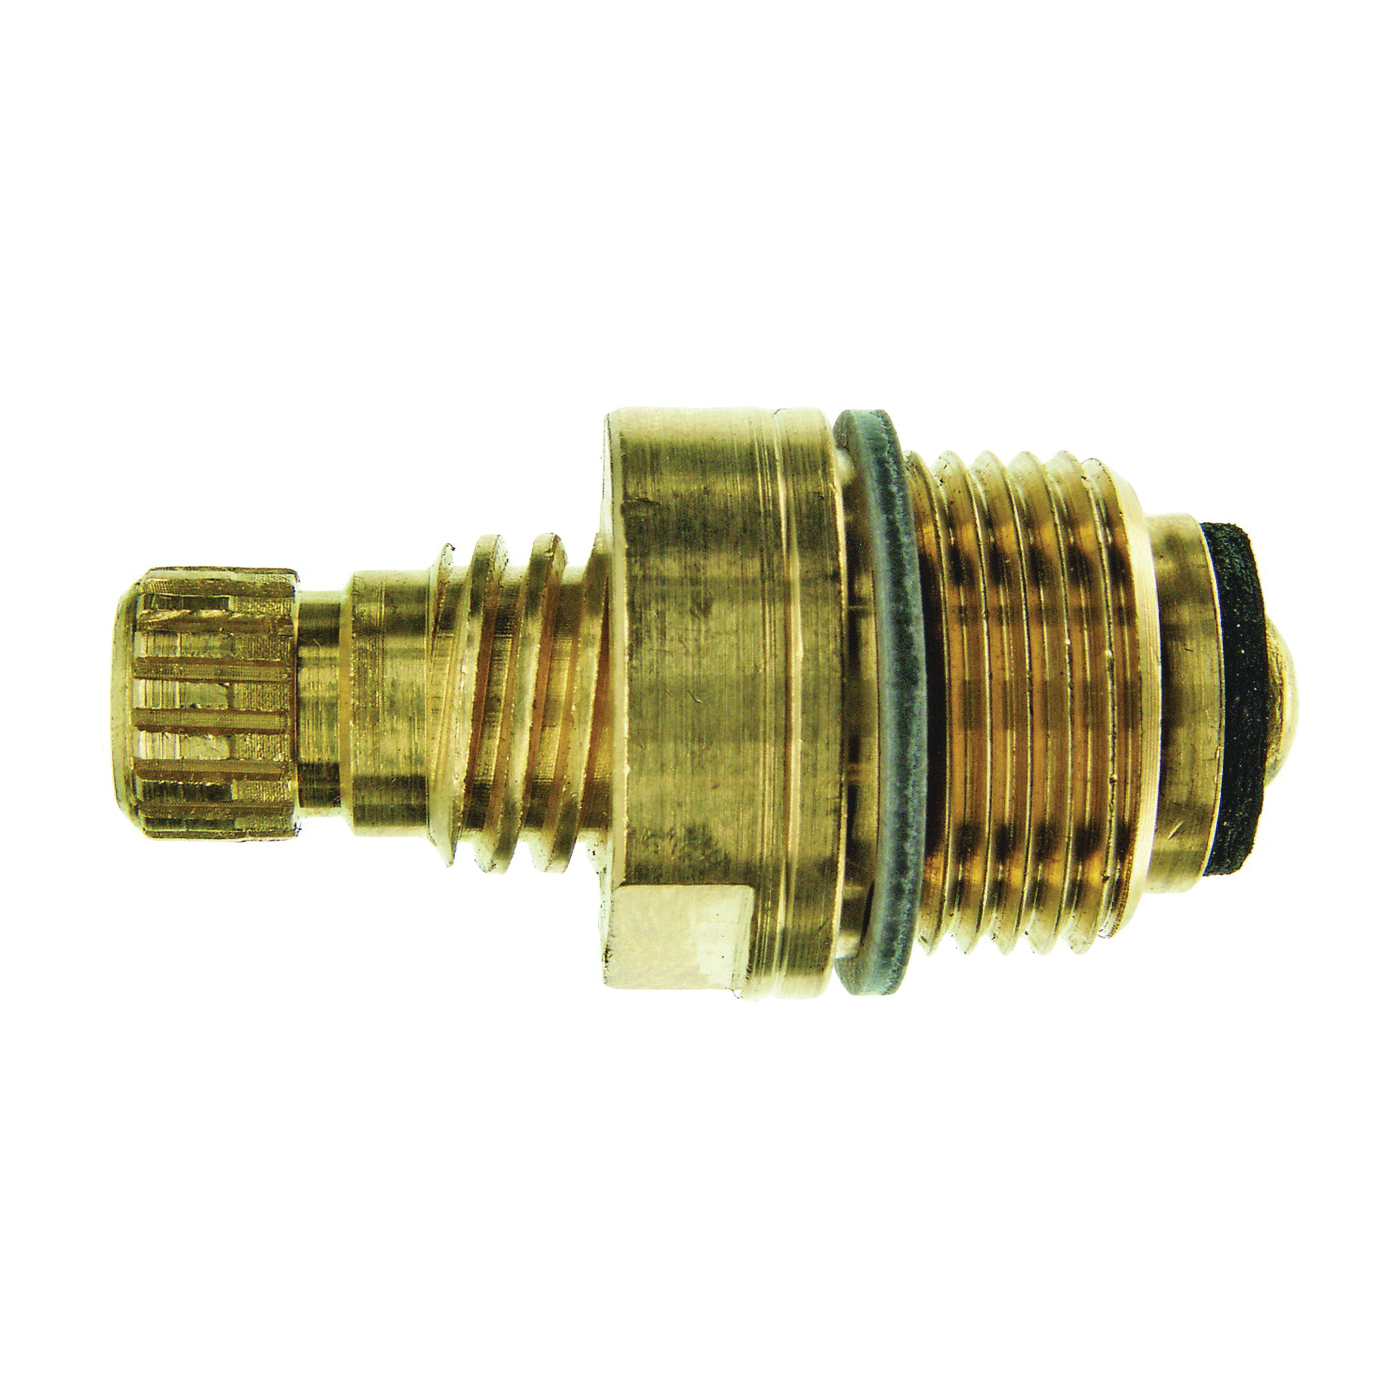 16000B Faucet Stem, Brass, 1-21/32 in L, For: Model 2J-3C Streamway Two Handle Bath Faucets